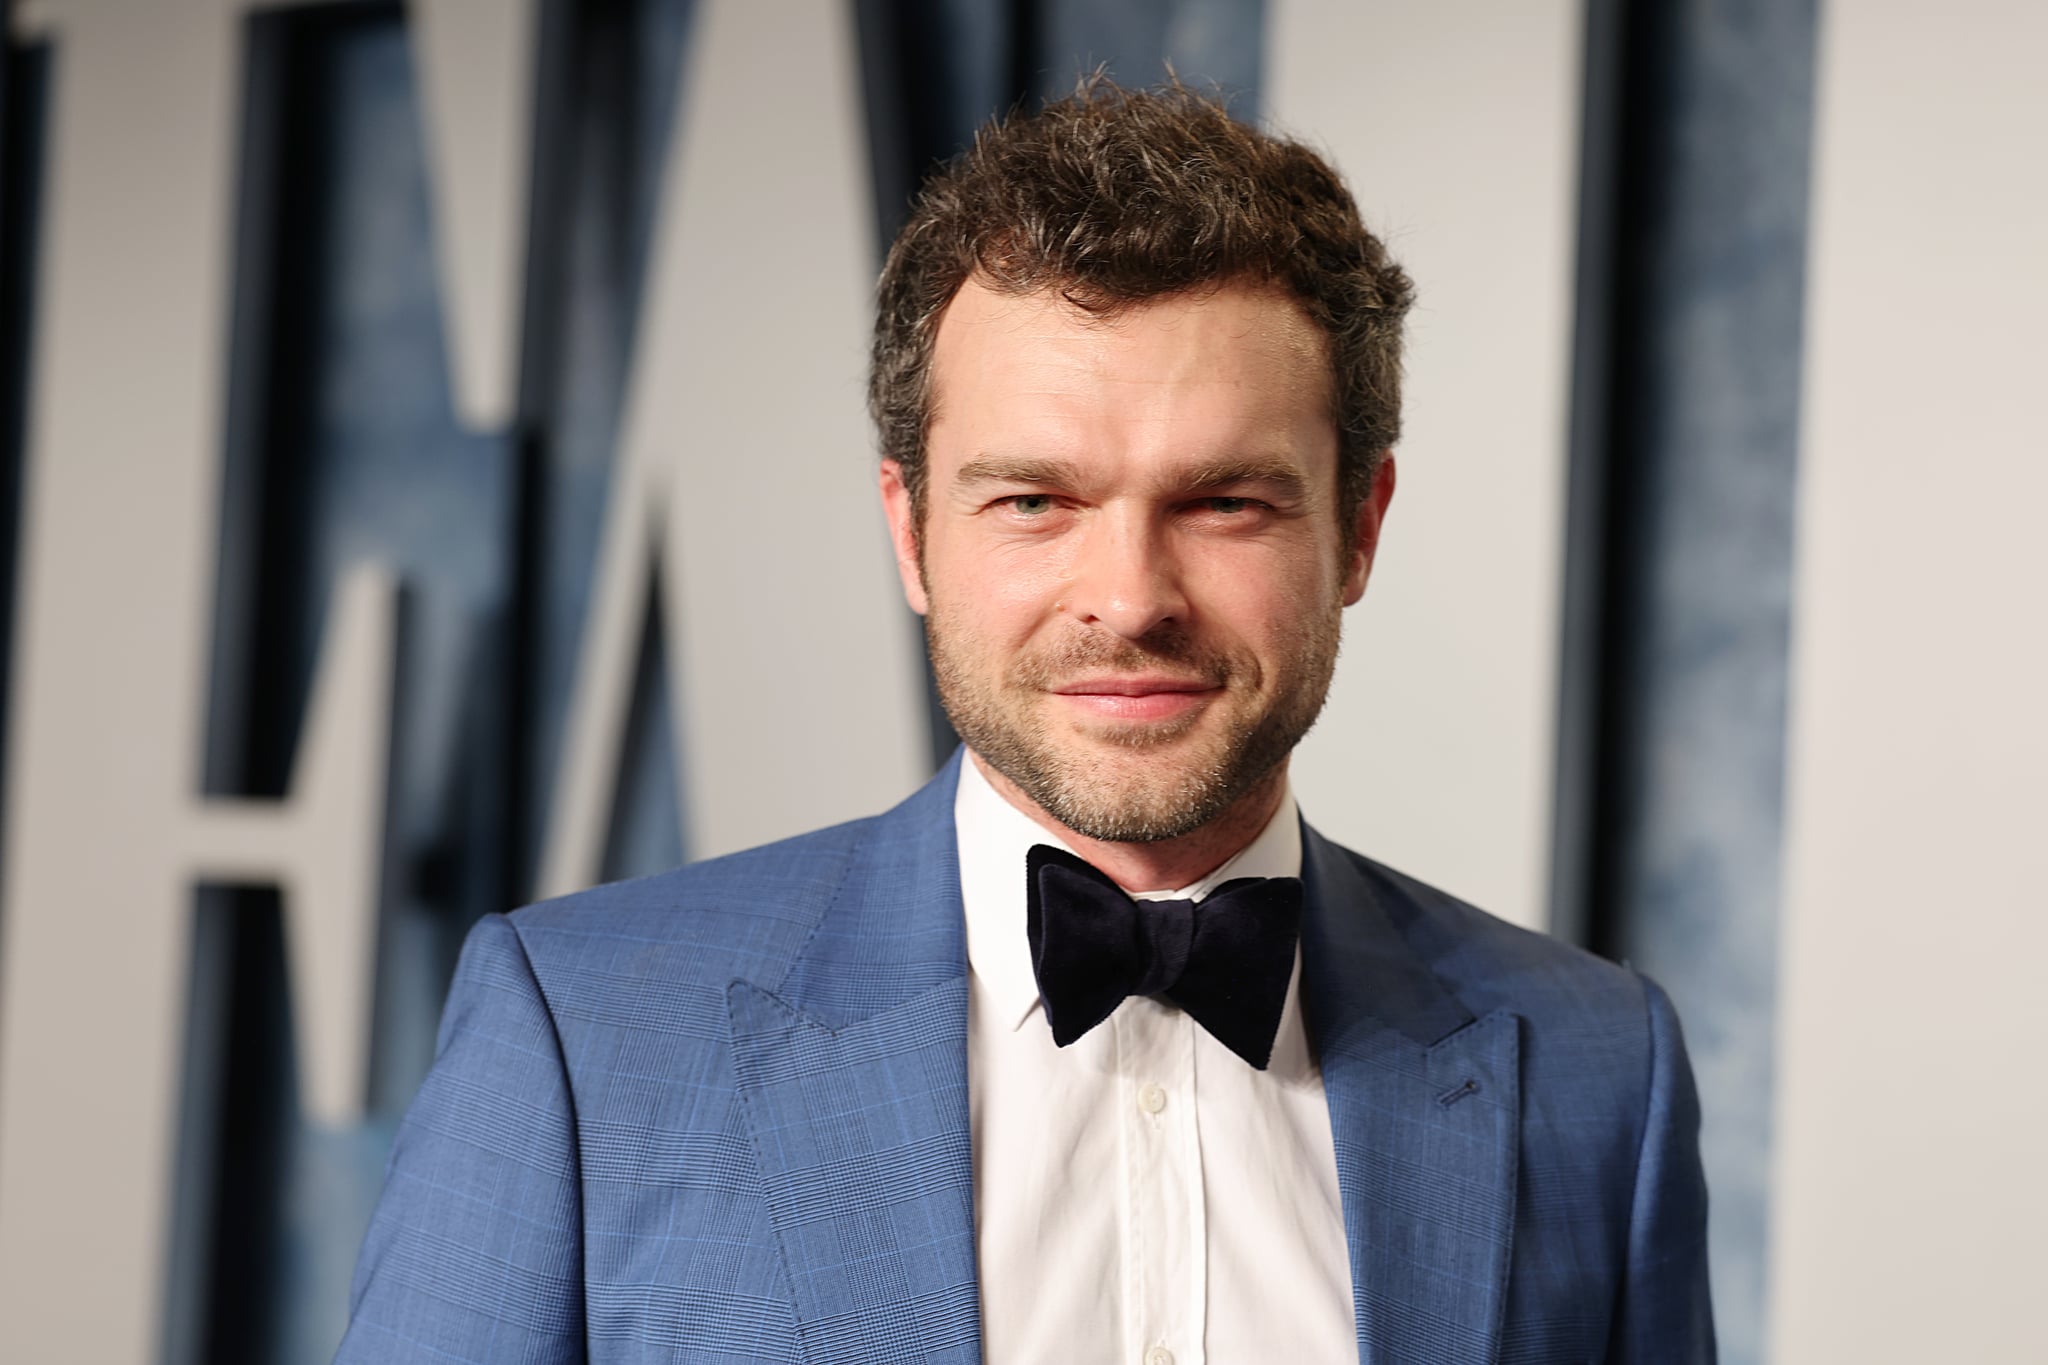 BEVERLY HILLS, CALIFORNIA - MARCH 12: Alden Ehrenreich attends the 2023 Vanity Fair Oscar Party Hosted By Radhika Jones at Wallis Annenberg Centre for the Performing Arts on March 12, 2023 in Beverly Hills, California. (Photo by Cindy Ord/VF23/Getty Images for Vanity Fair)